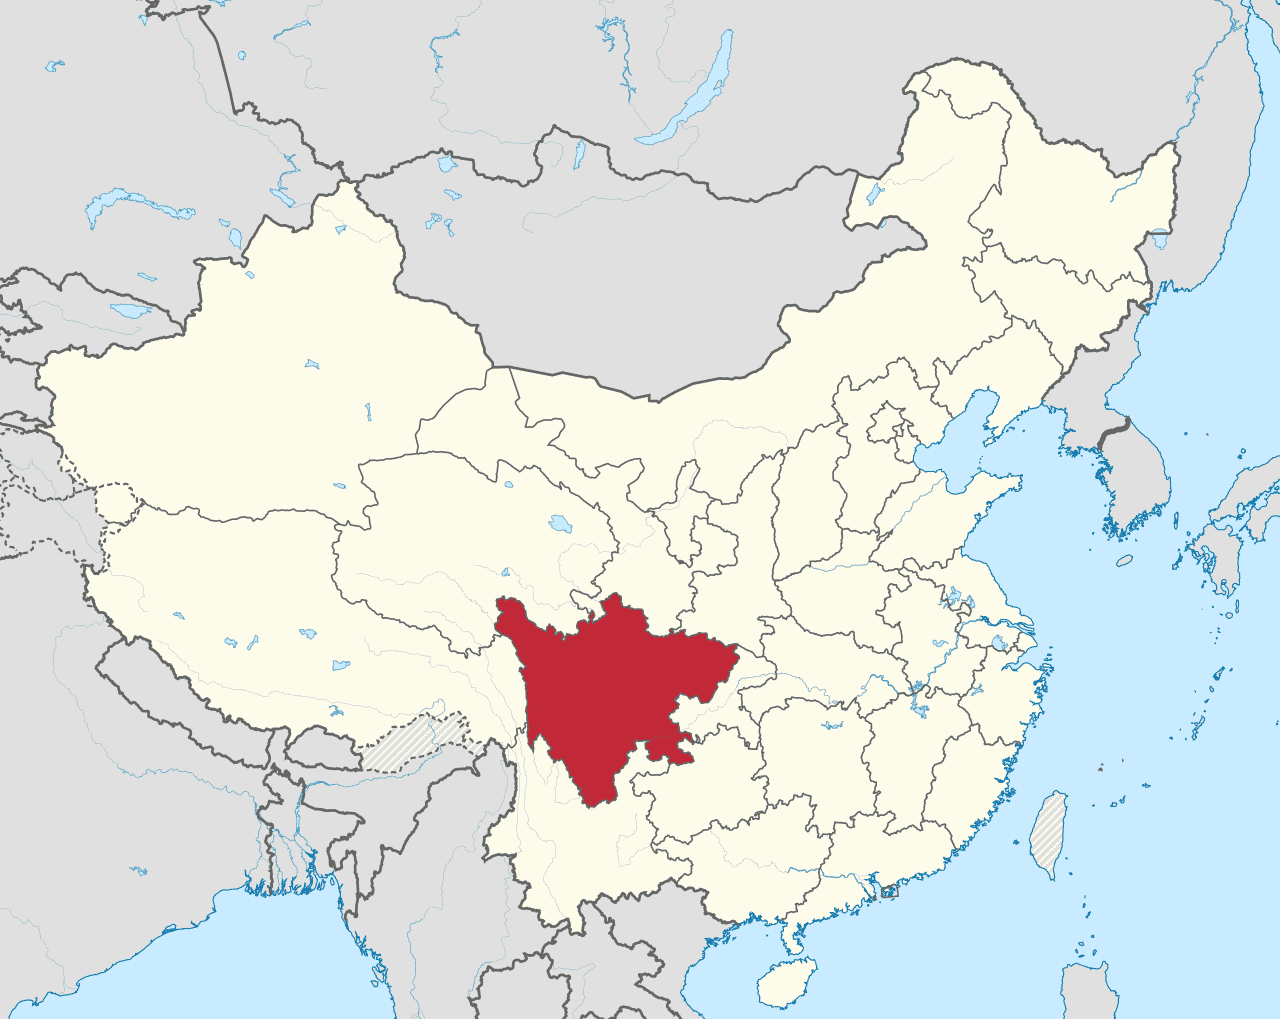 Sichuan province in China is home to a large number of Bitcoin miners due to the low cost of hydroelectric power. Source: Wikipedia.